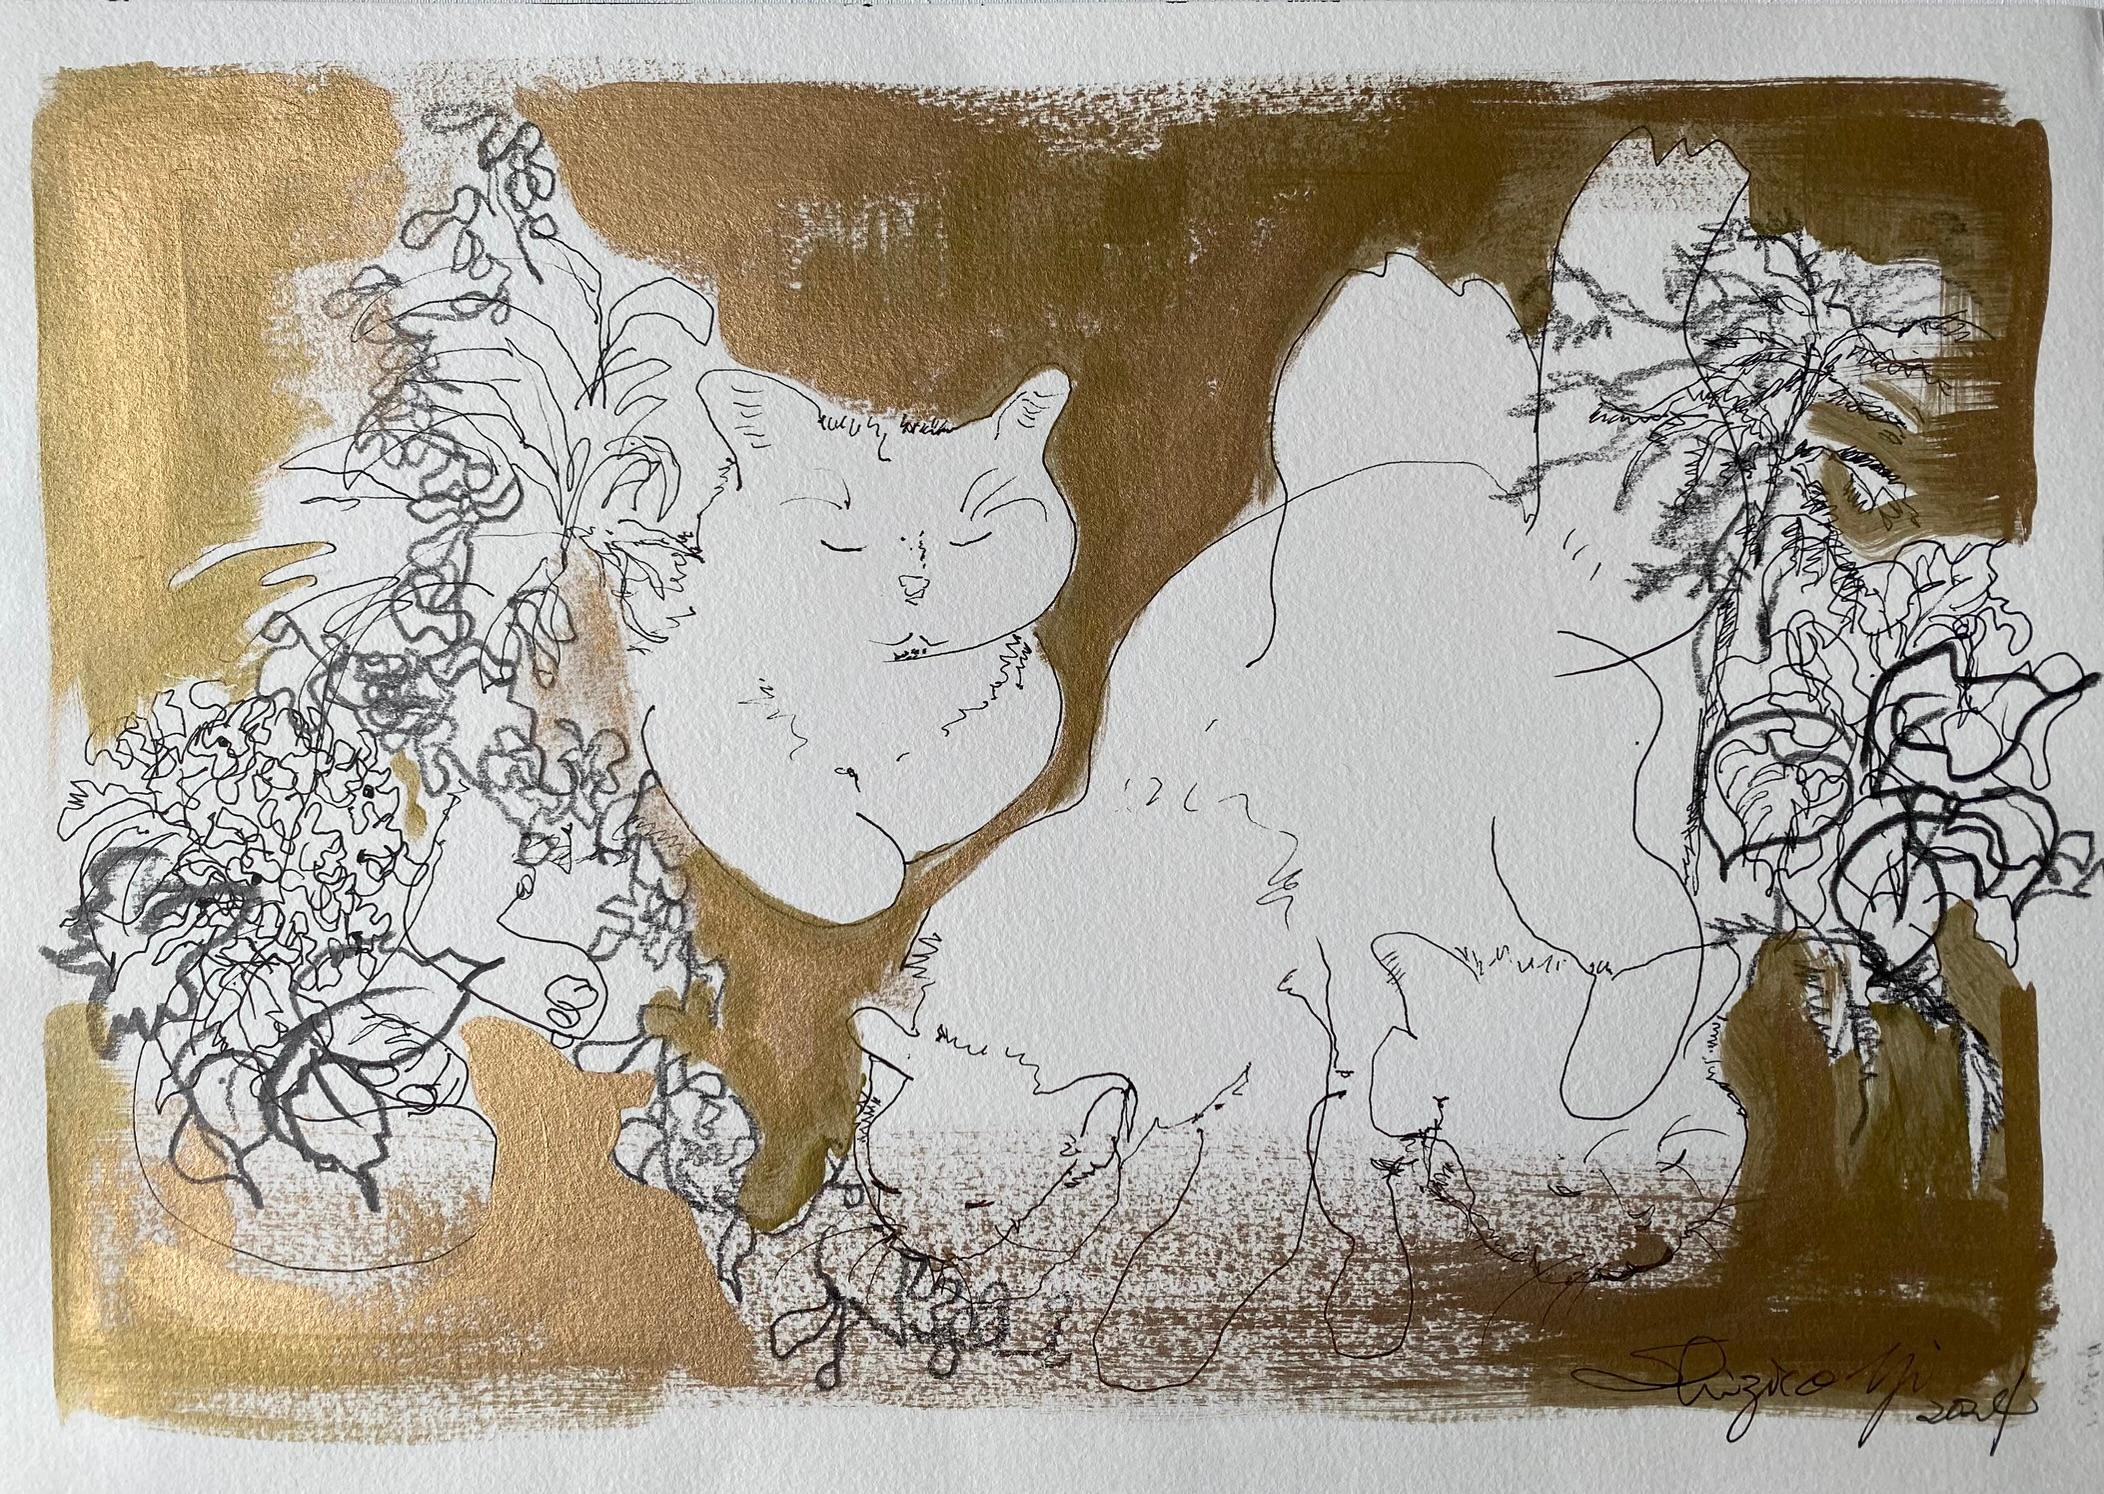 Original Set-Breakfast with Cat Series-British Award Artist-Gold, ink on papers For Sale 3